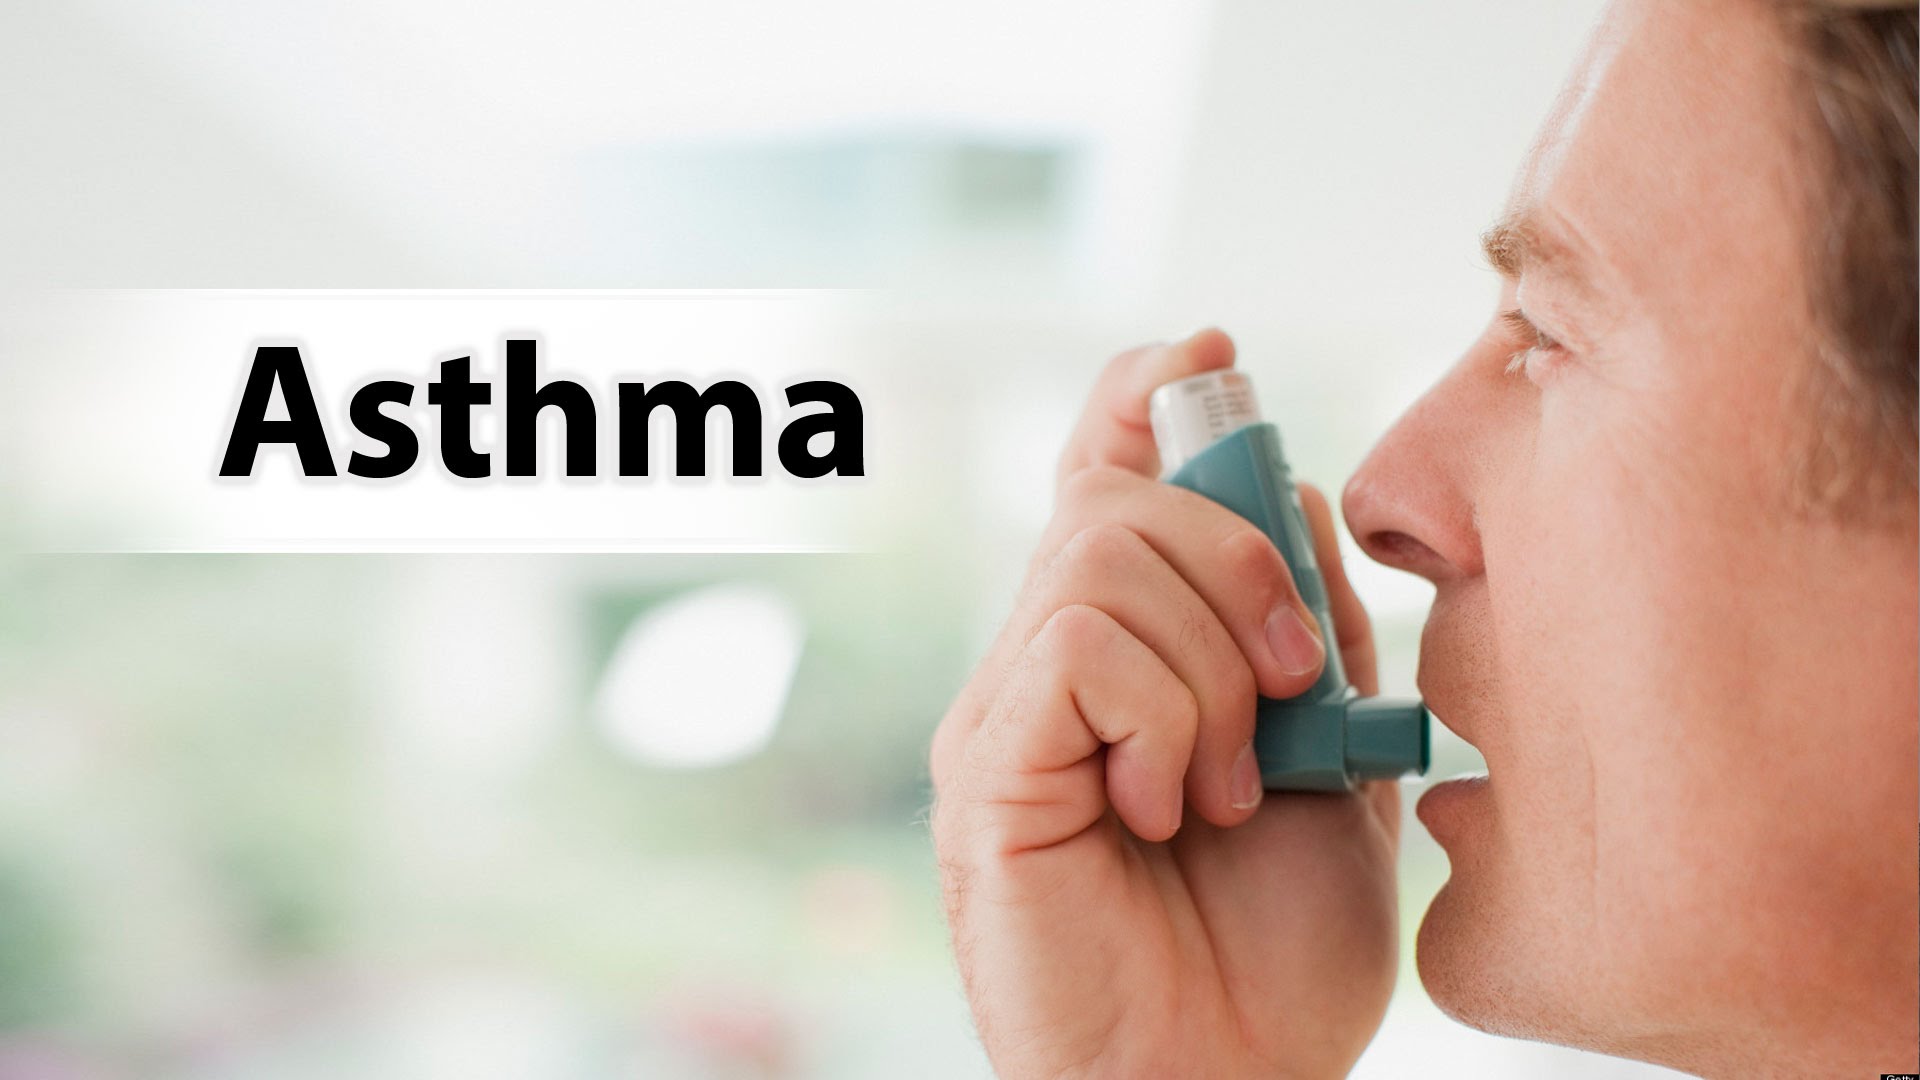 A person using an inhaler. The word 'asthma' is written on the left.